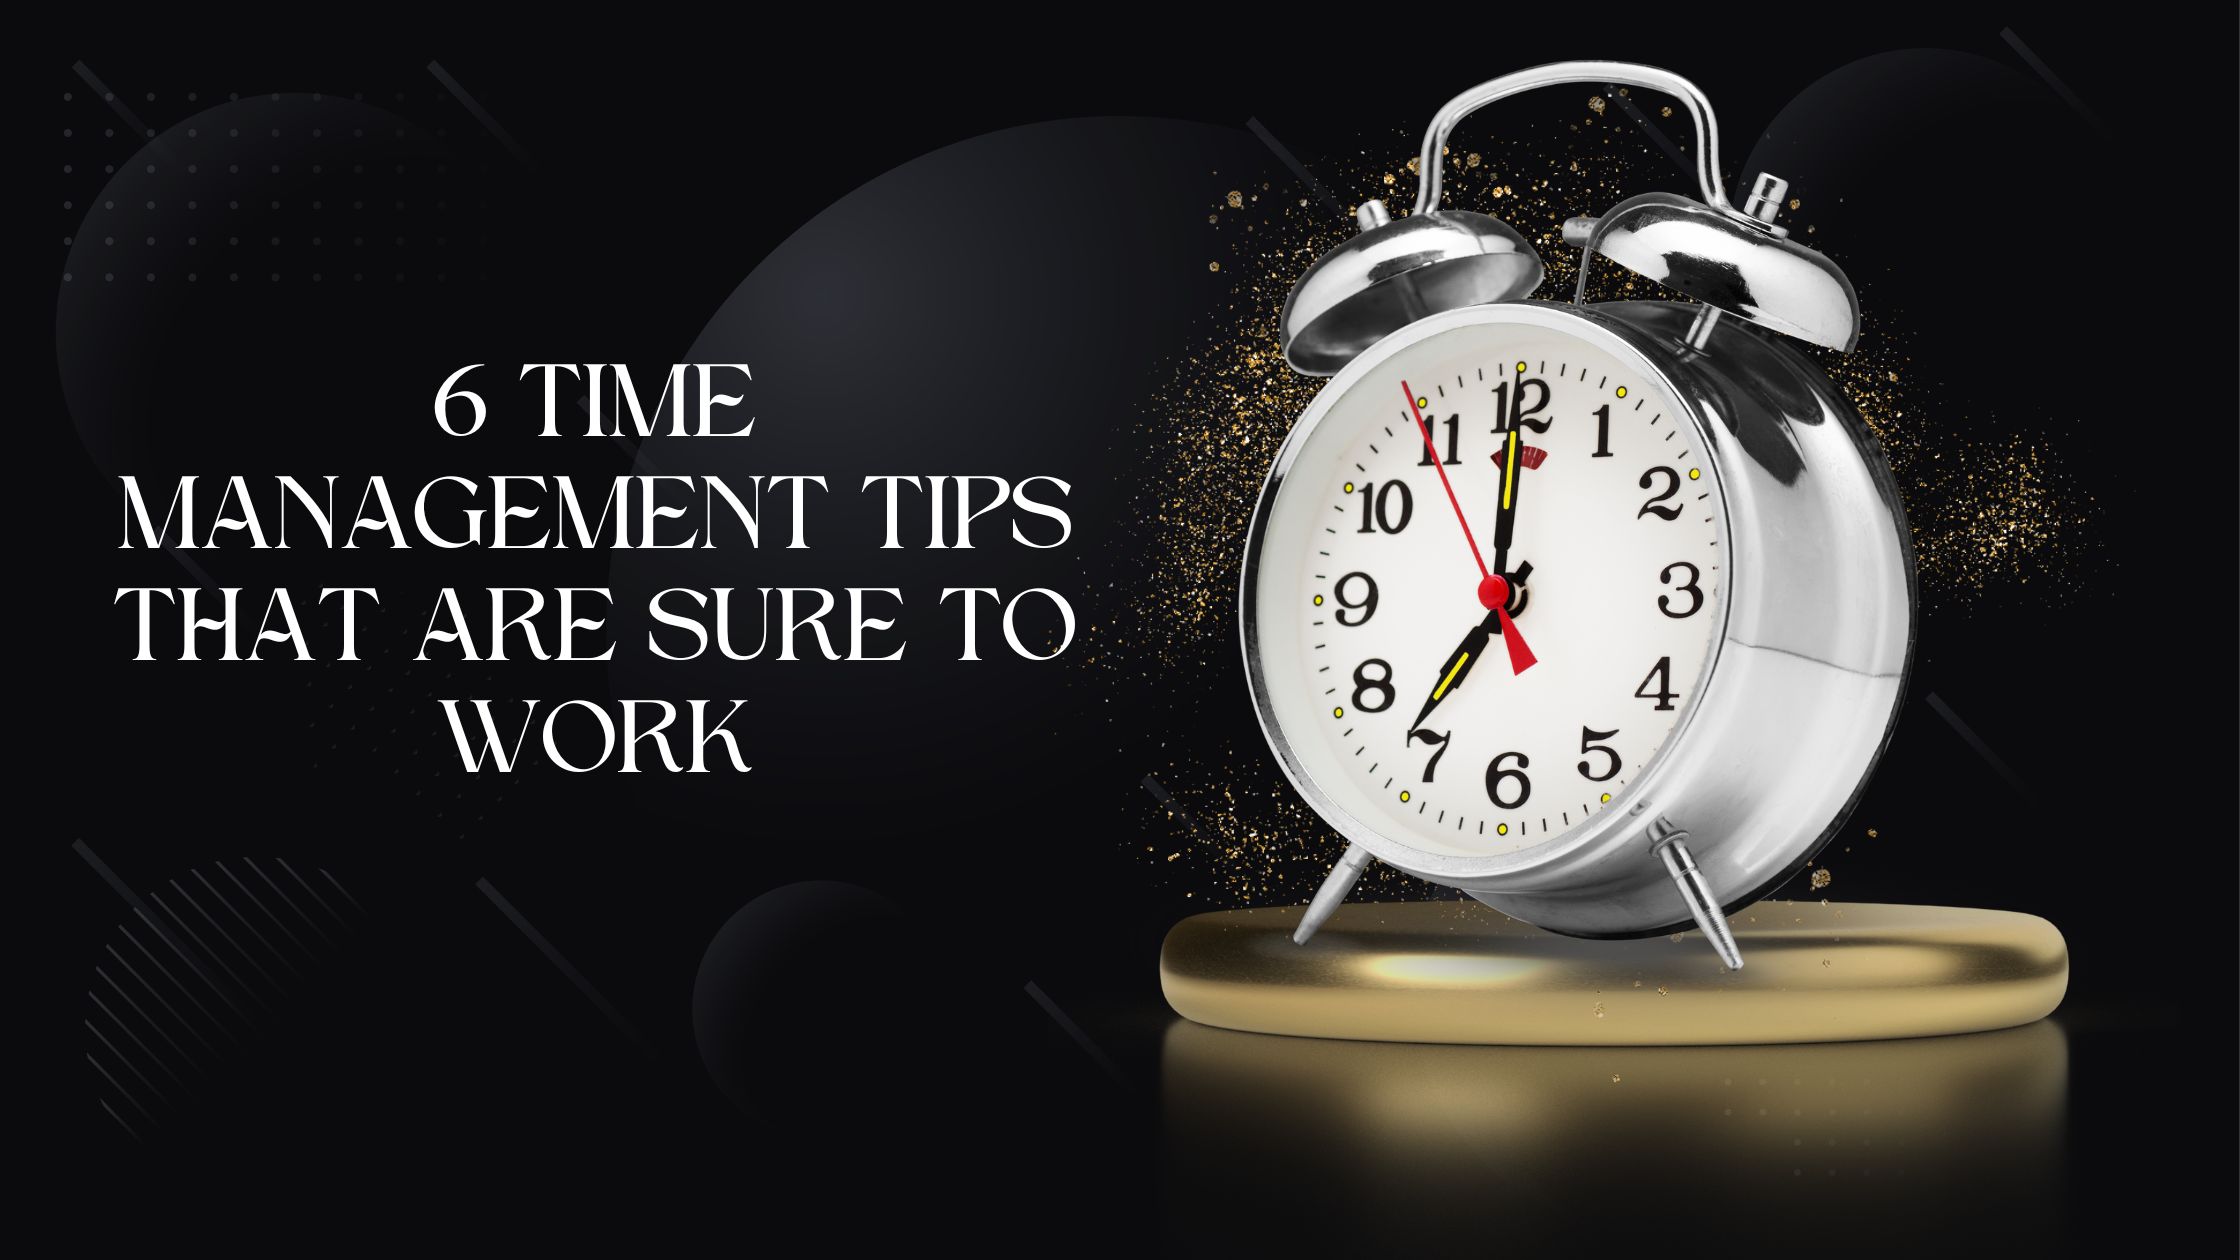 6 time management tips that are sure to work